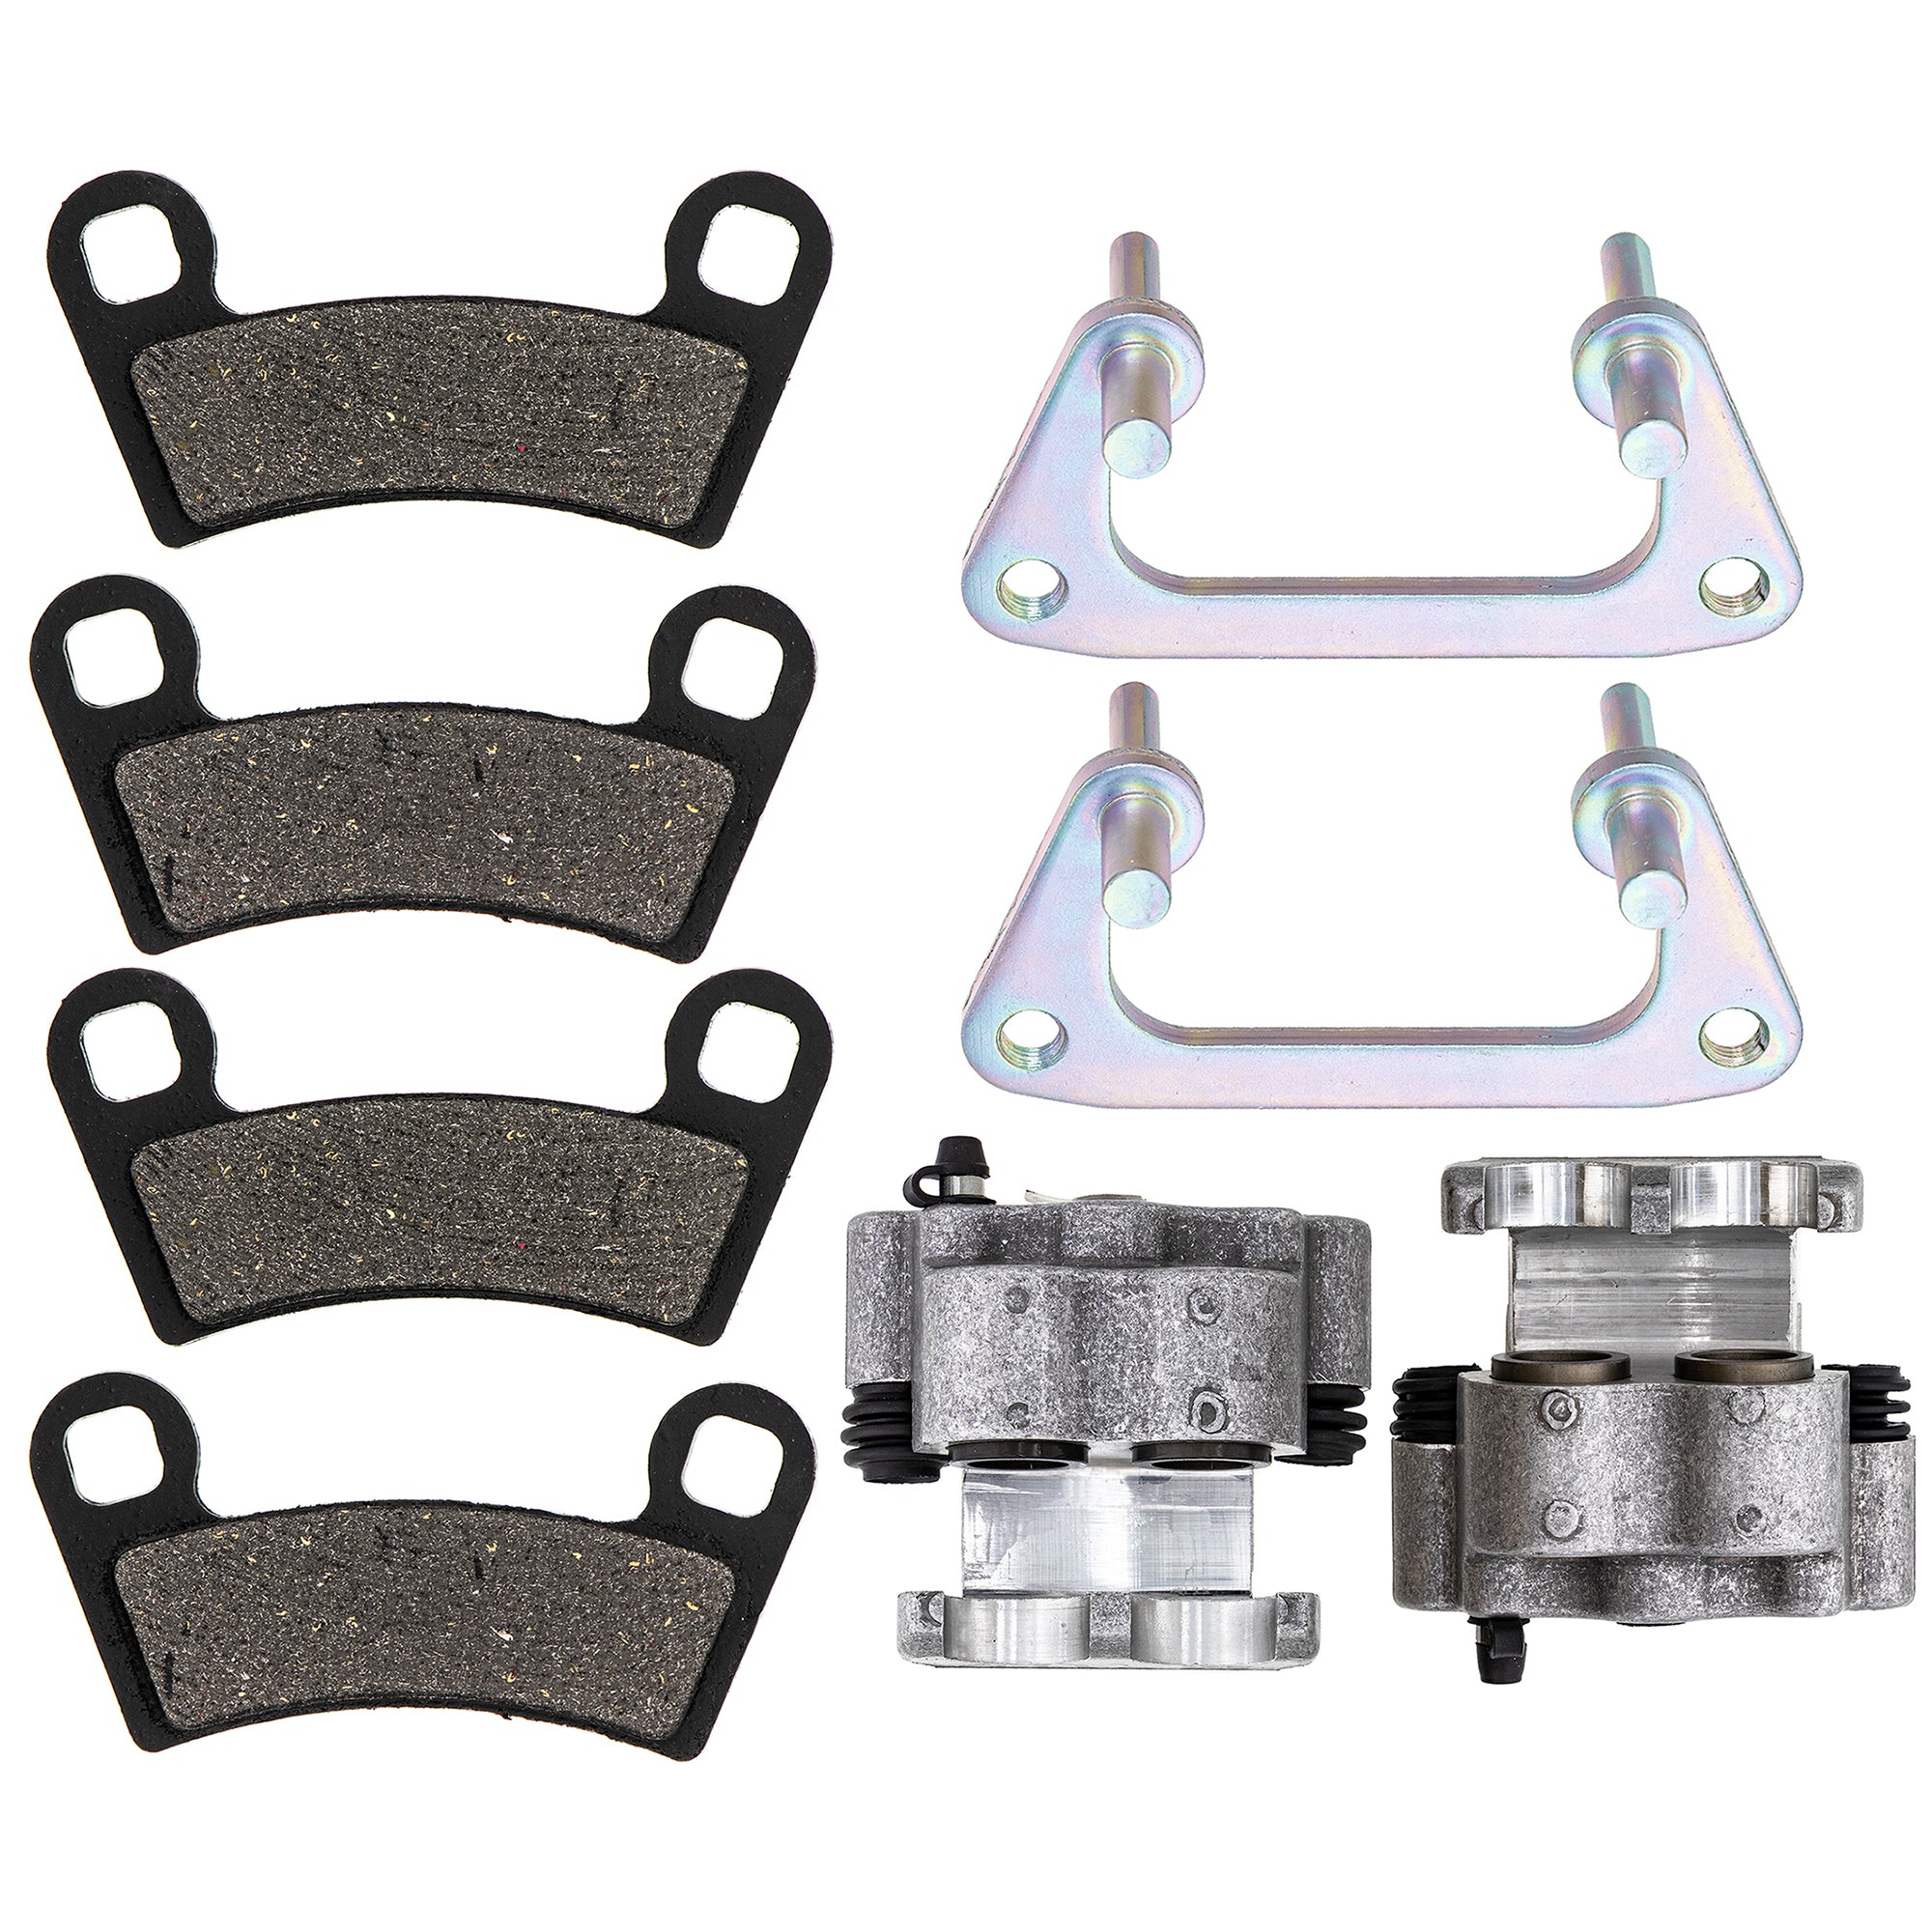 Front Brake Calipers & Pads Set for Polaris RZR Ranger Outlaw 2203628 2204088 2205606 NICHE MK1001255